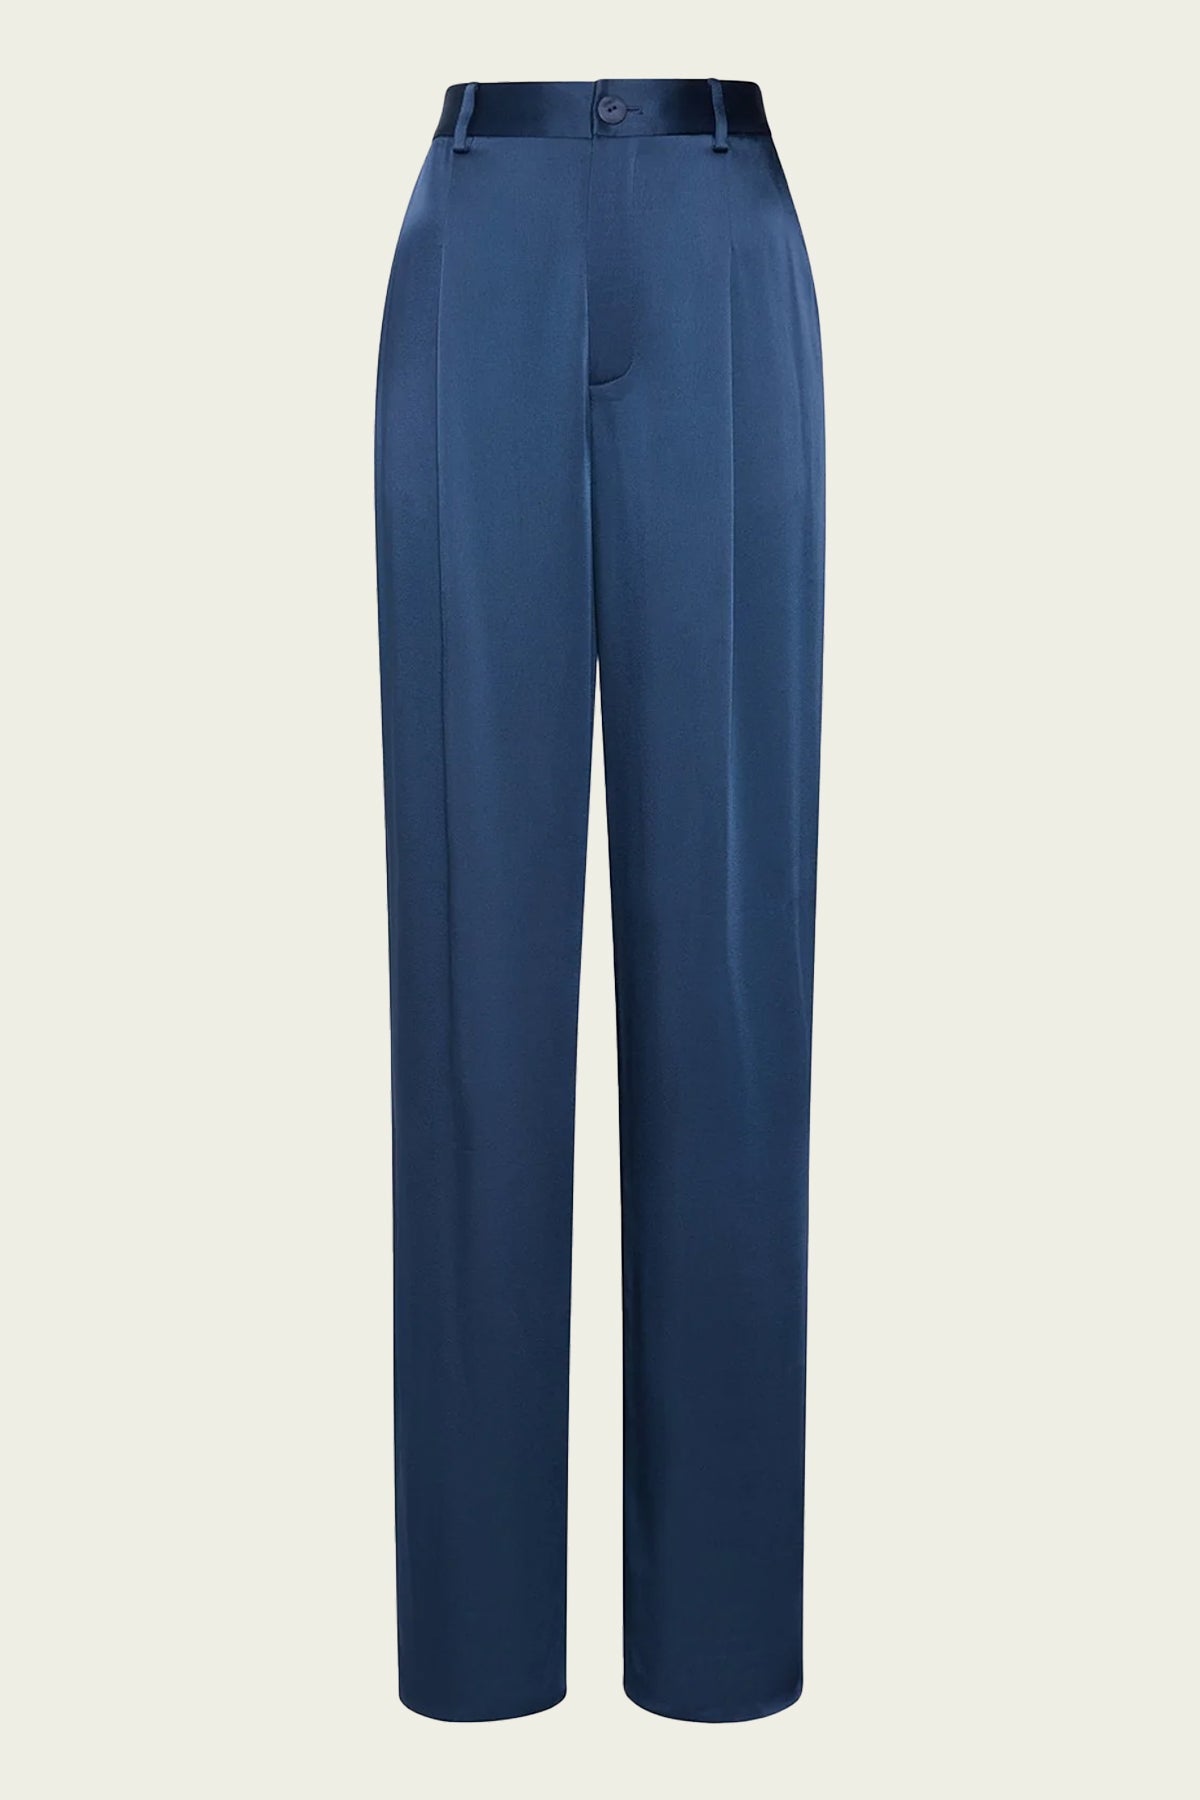 Satin Relaxed Pleated Pant in Ink - shop-olivia.com